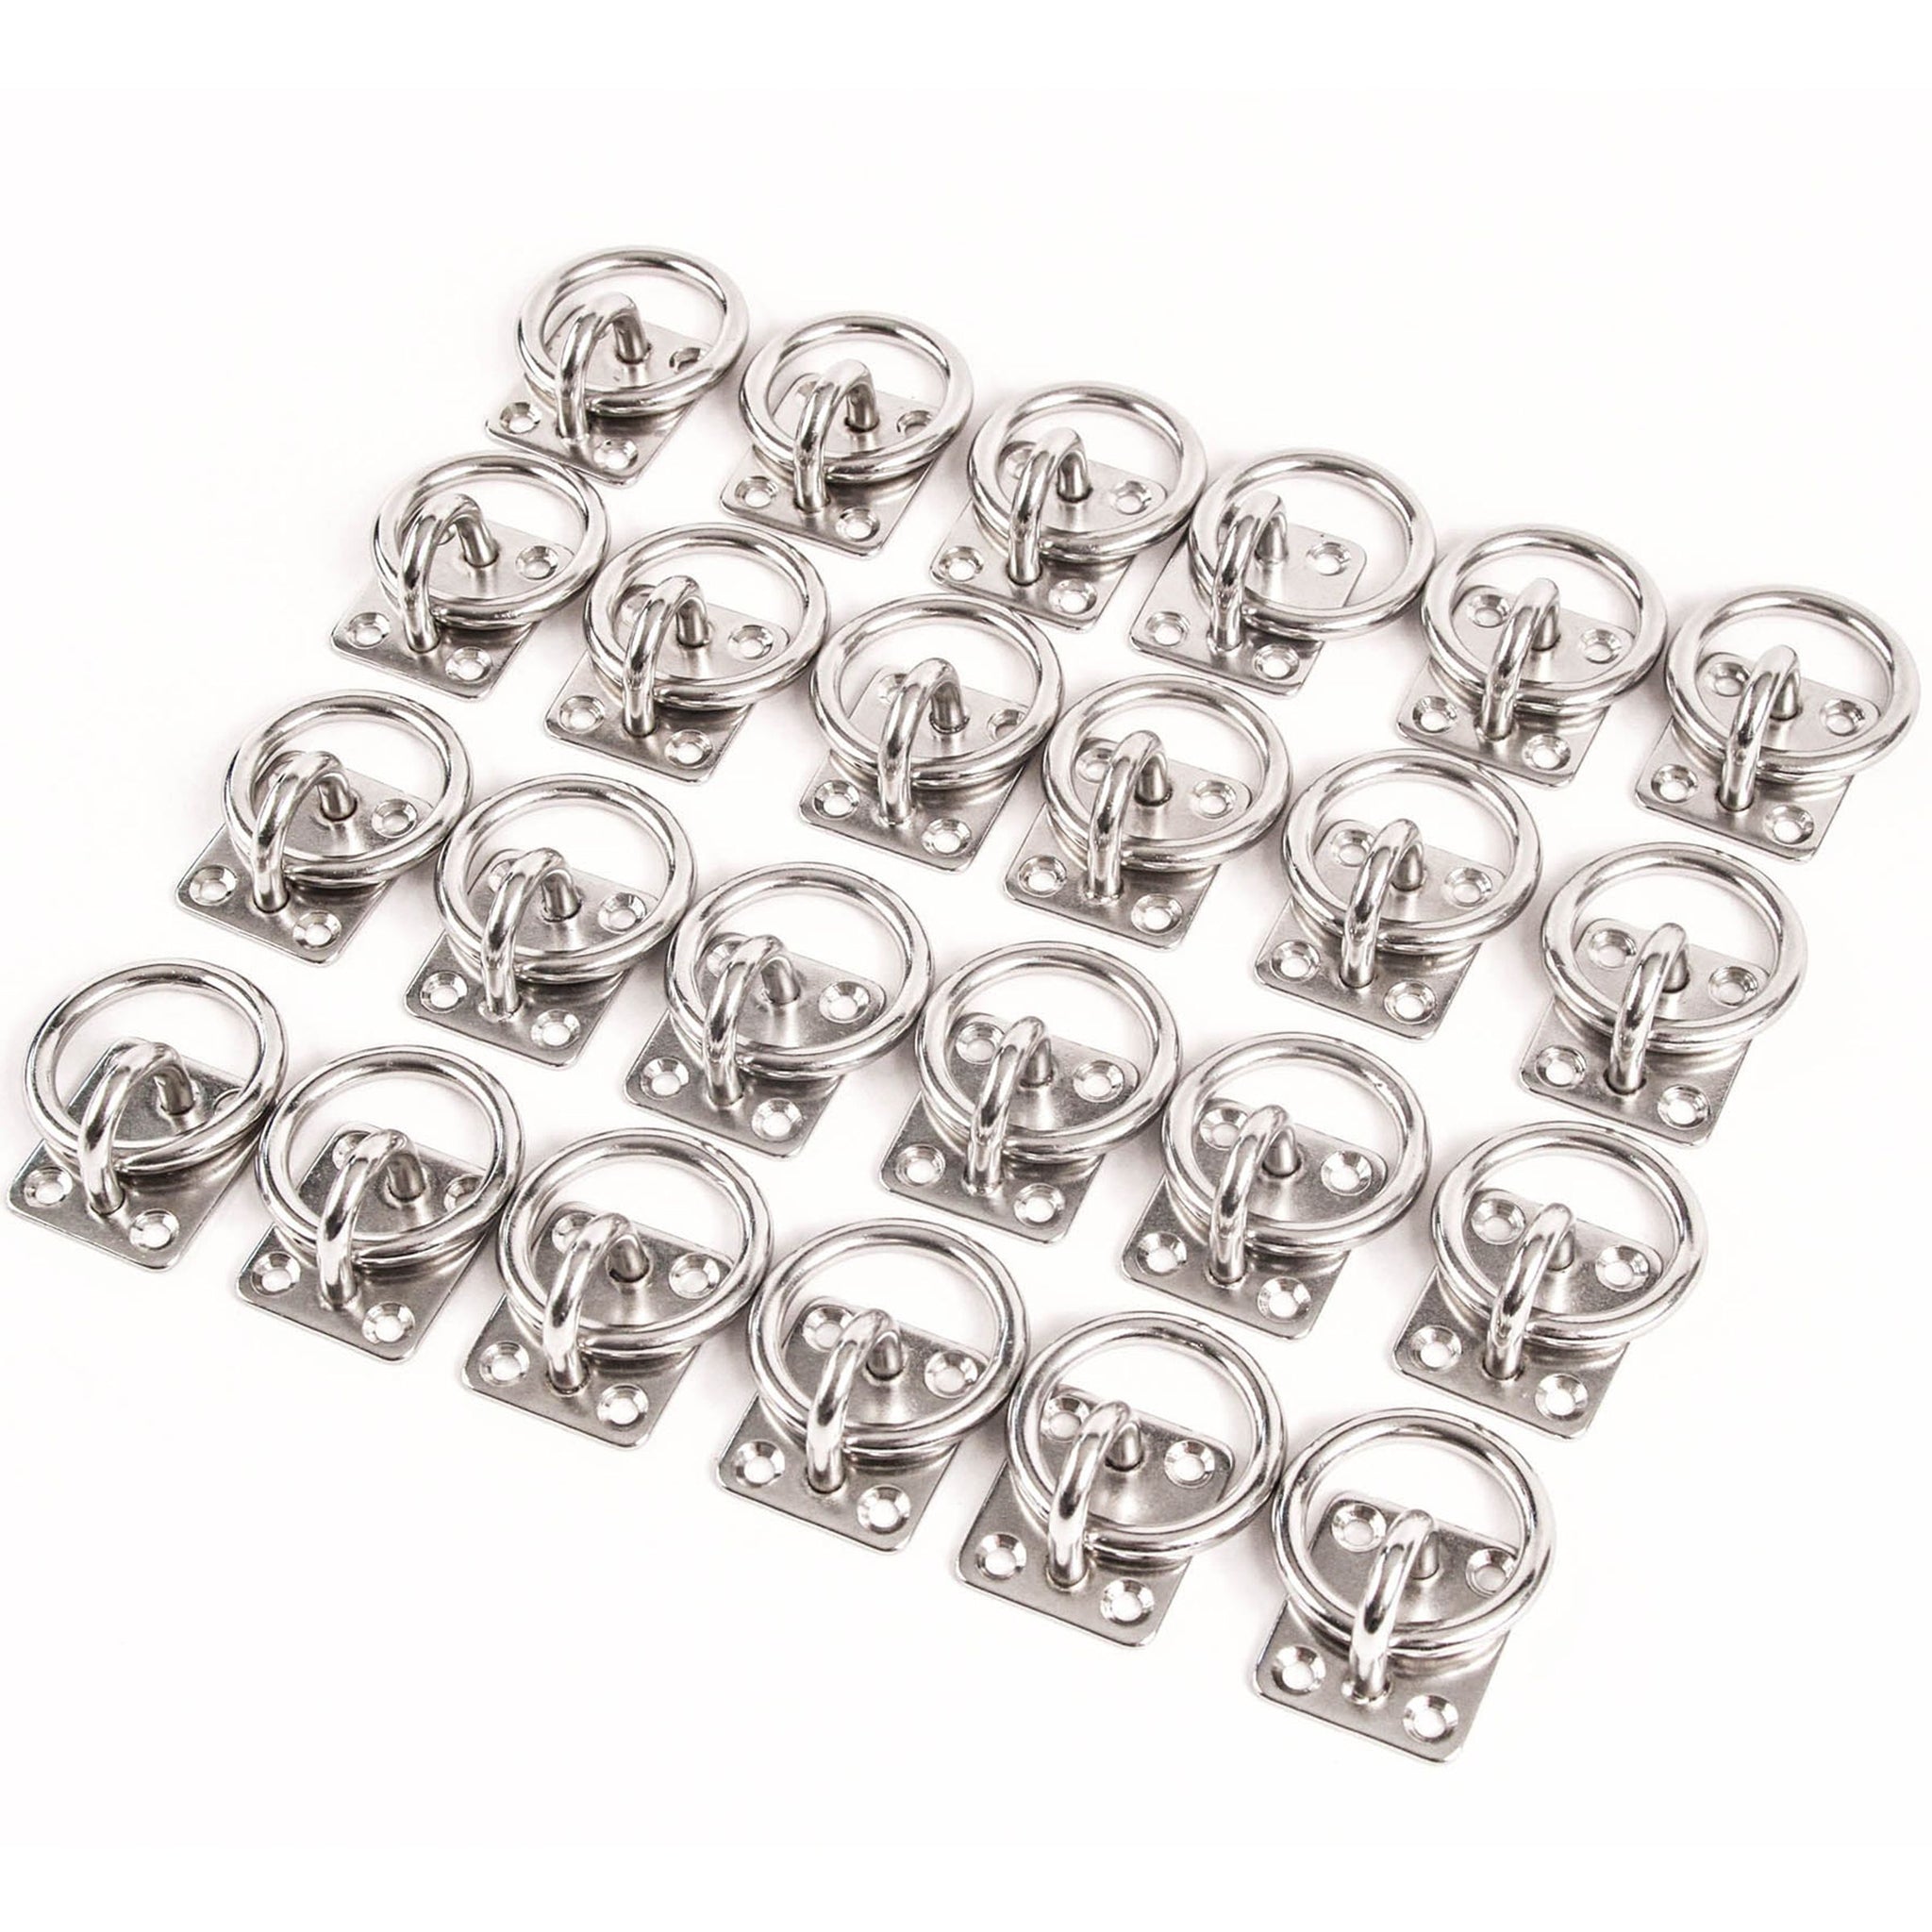 Red Hound Auto 24 Stainless Steel 6mm Square Eye Plates w Ring 1/4 Inches Marine 316 SS Boat Rigging